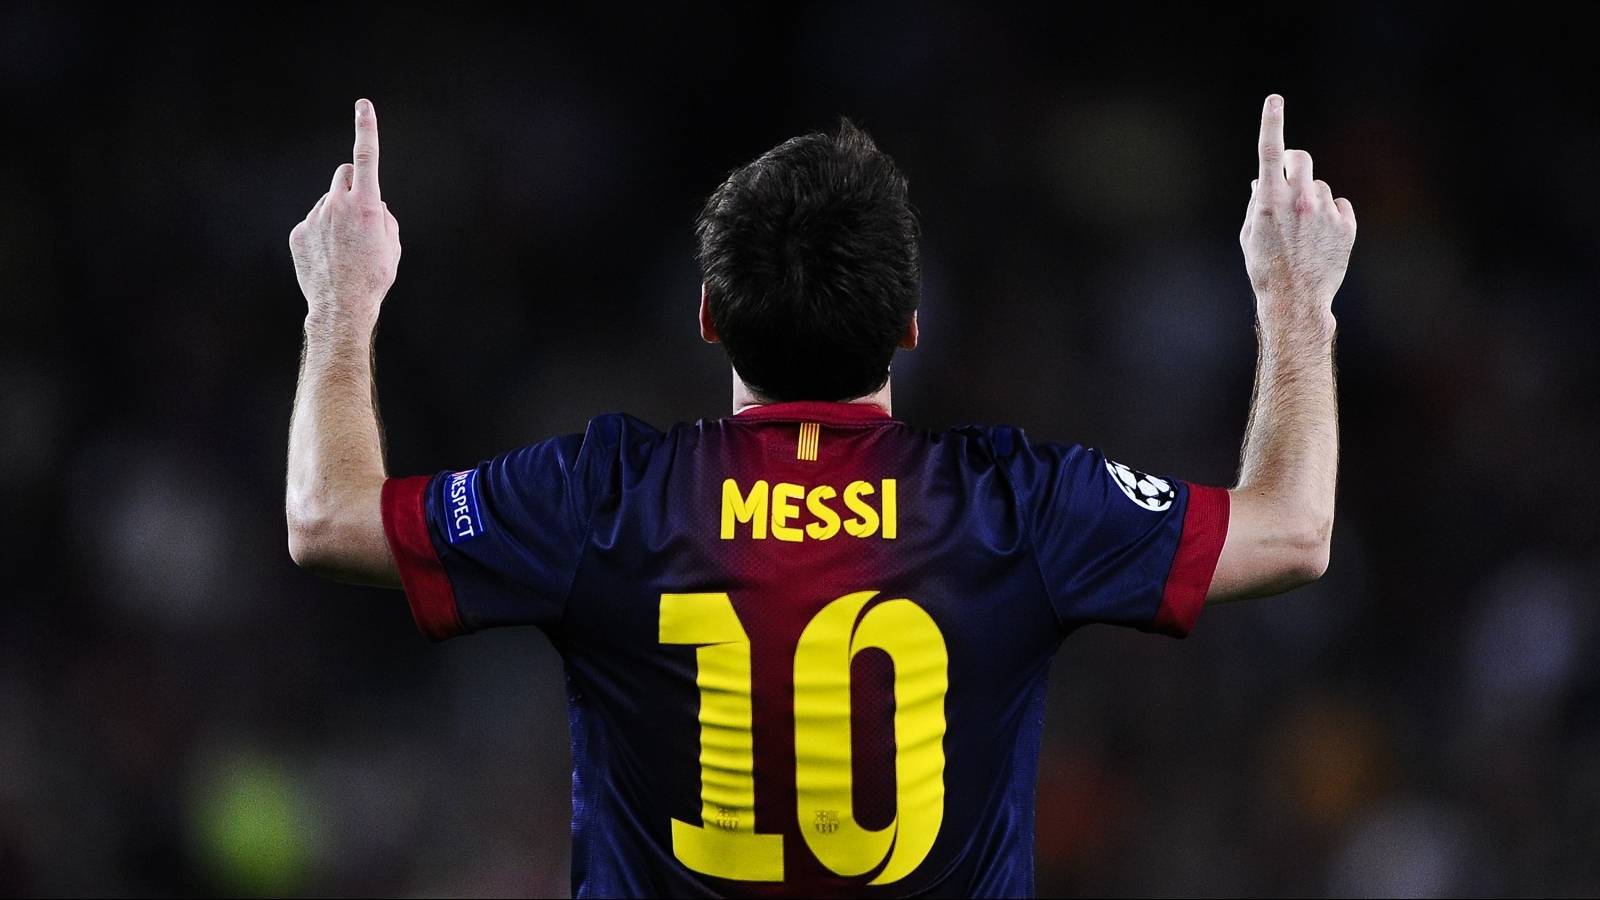 lionel andres messi, people, sports, men, football, black